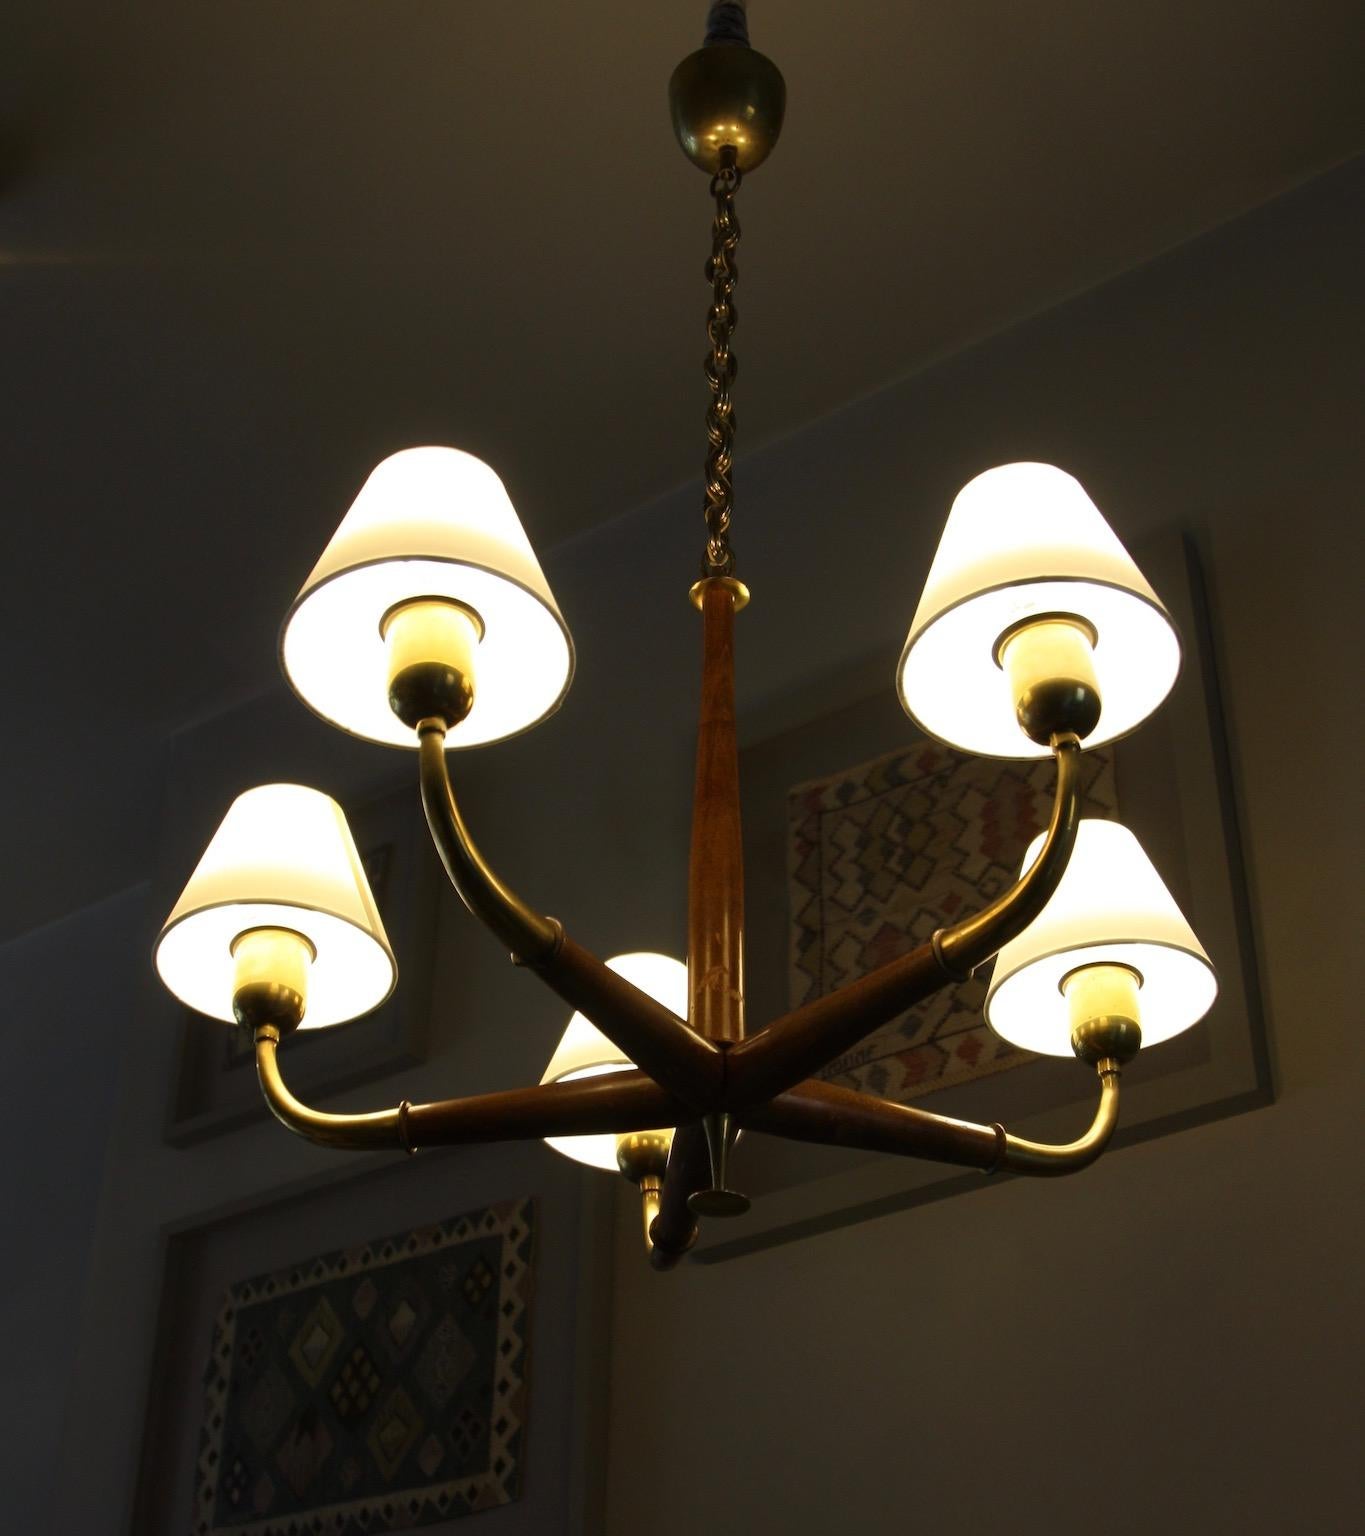 Porcelain Austrian Vintage Mahogany and Brass Chandelier, circa 1950s